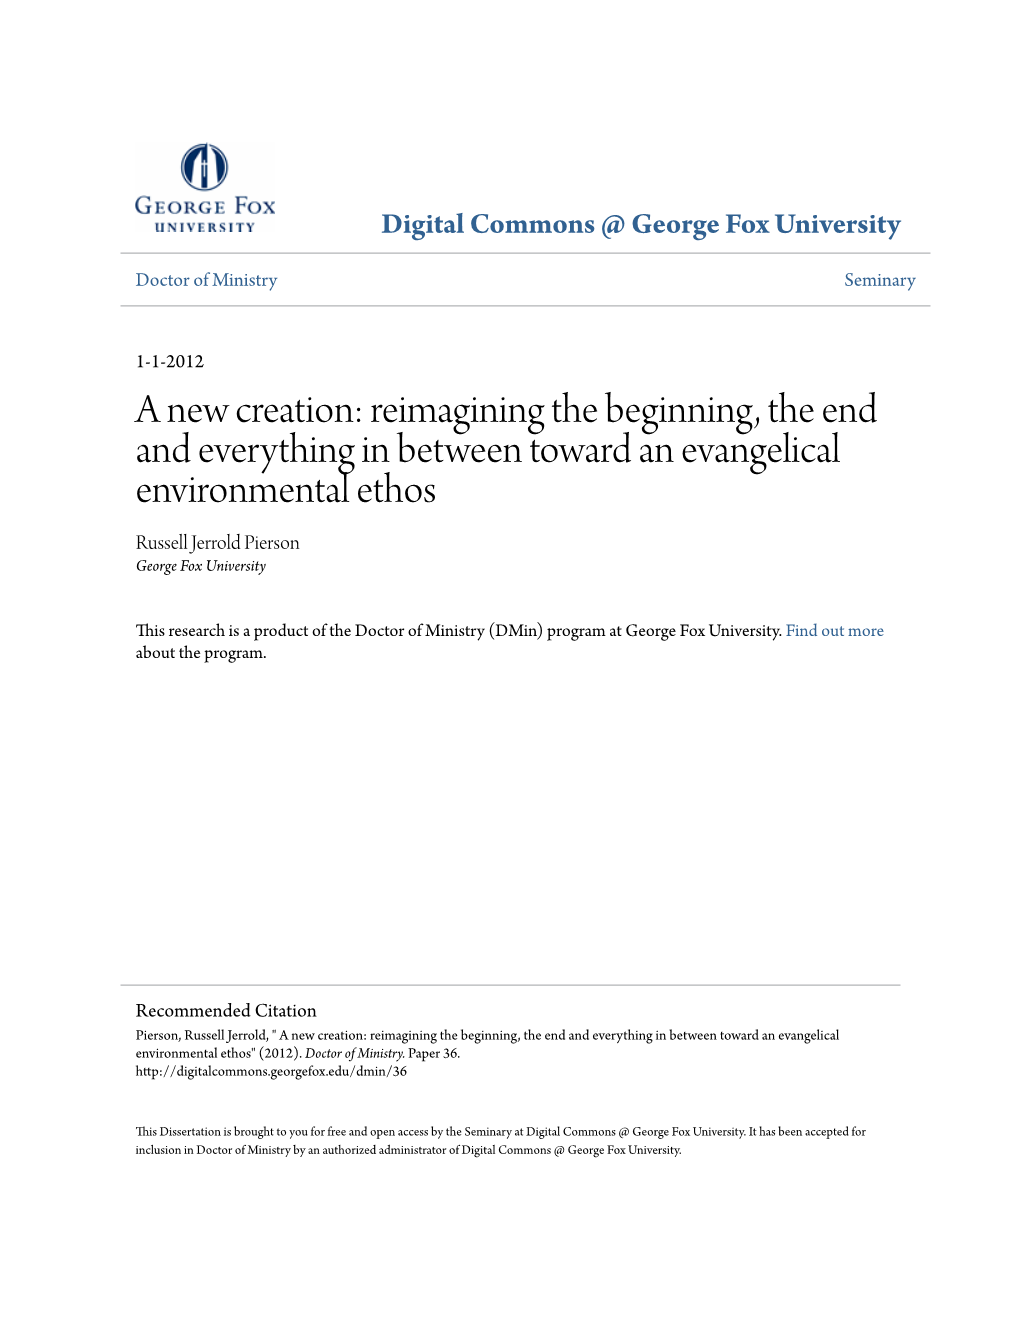 A New Creation: Reimagining the Beginning, the End and Everything in Between Toward an Evangelical Environmental Ethos Russell Jerrold Pierson George Fox University